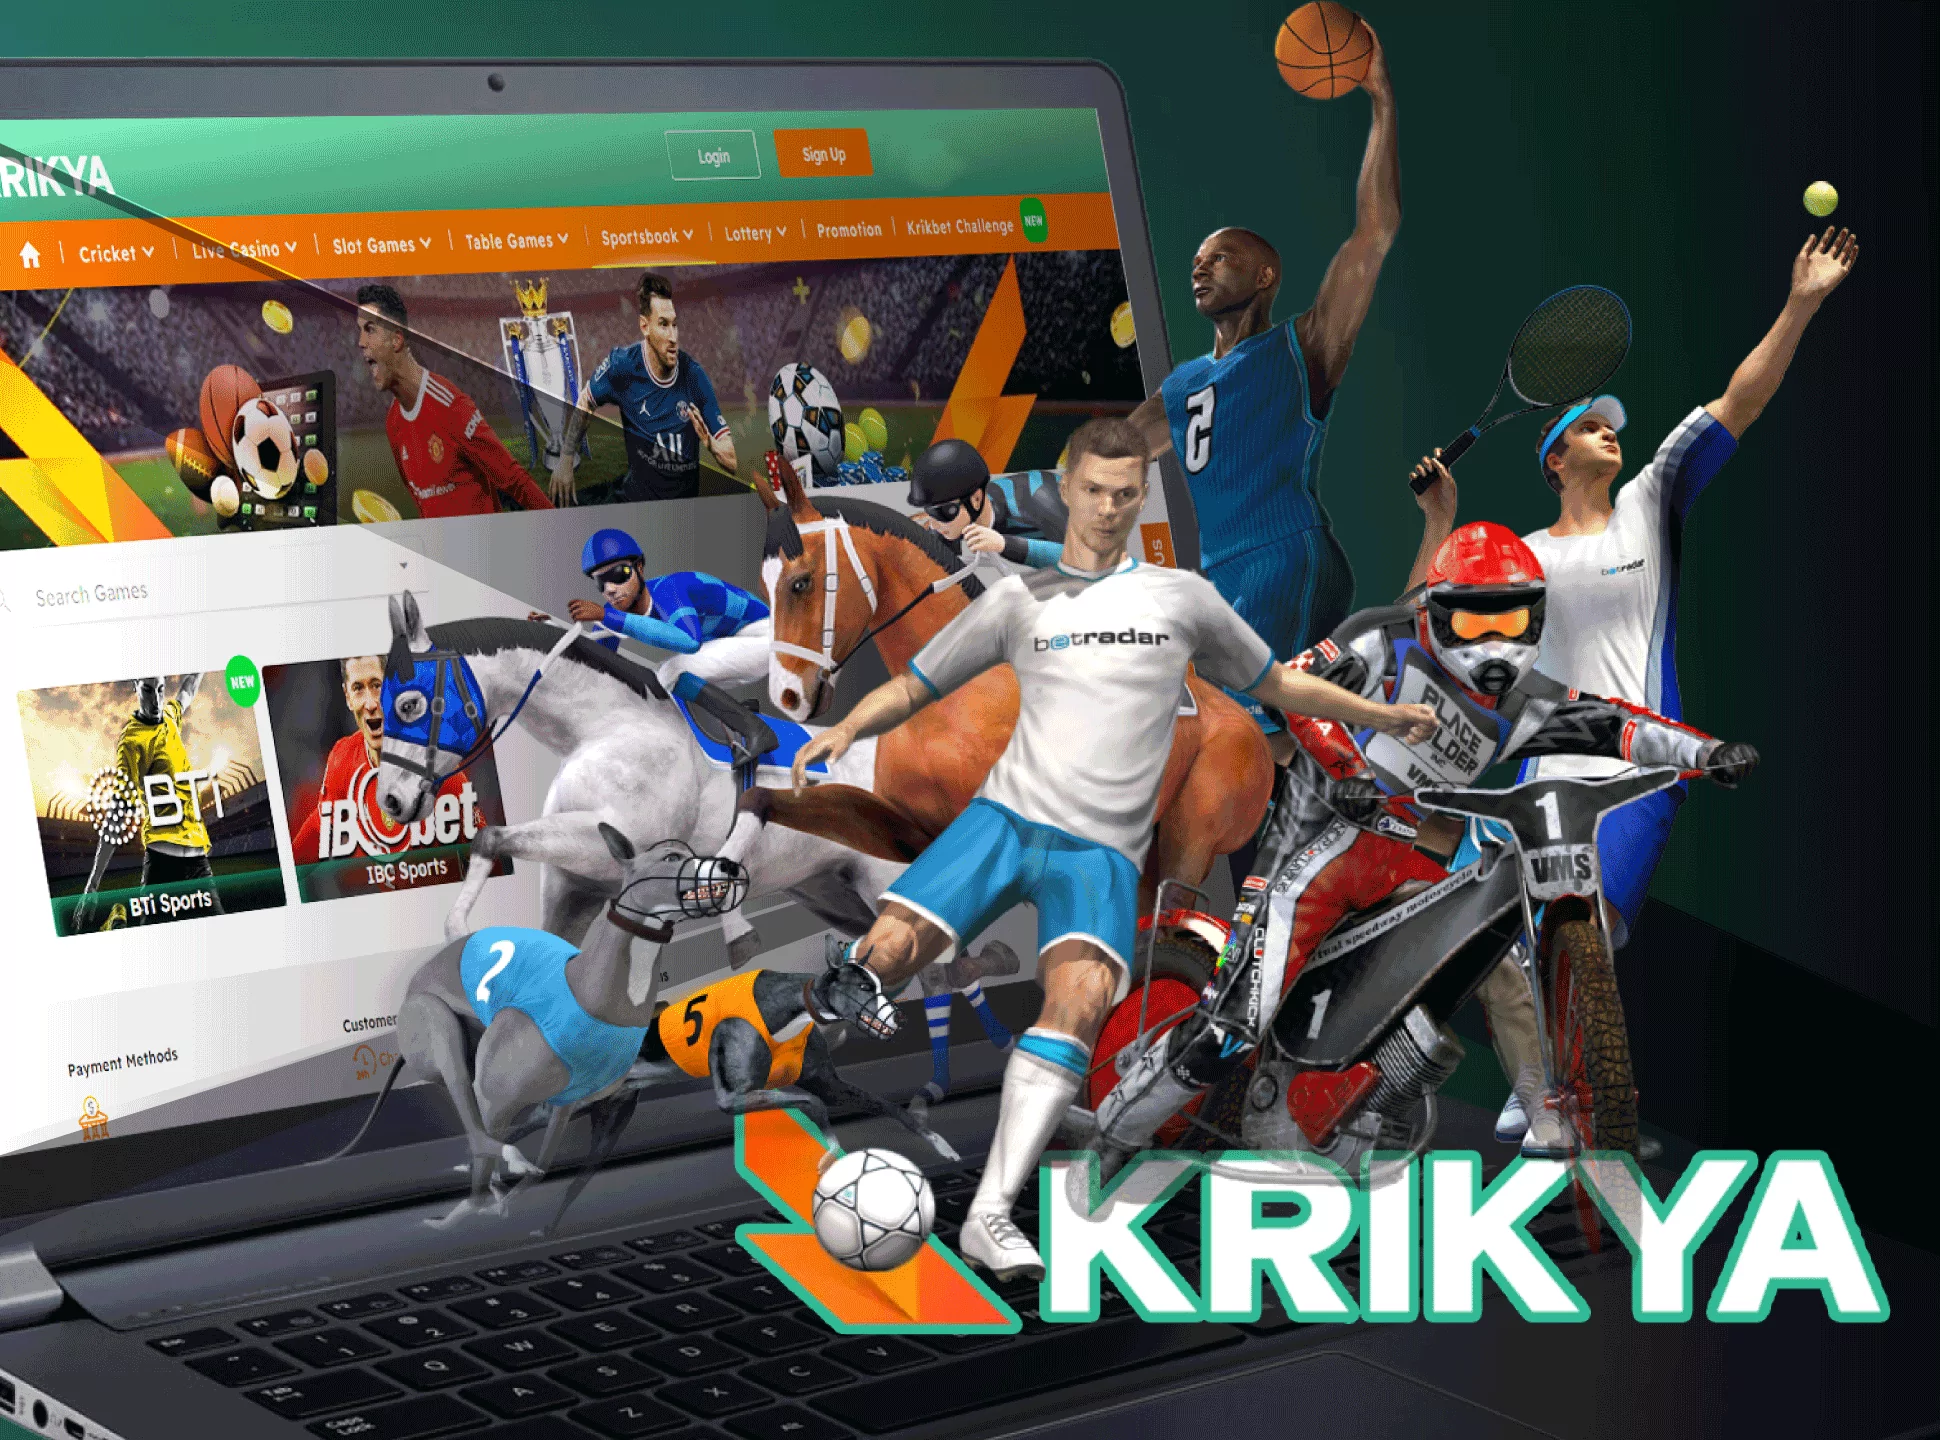 You can place bets on the virtual sports at Krikya.